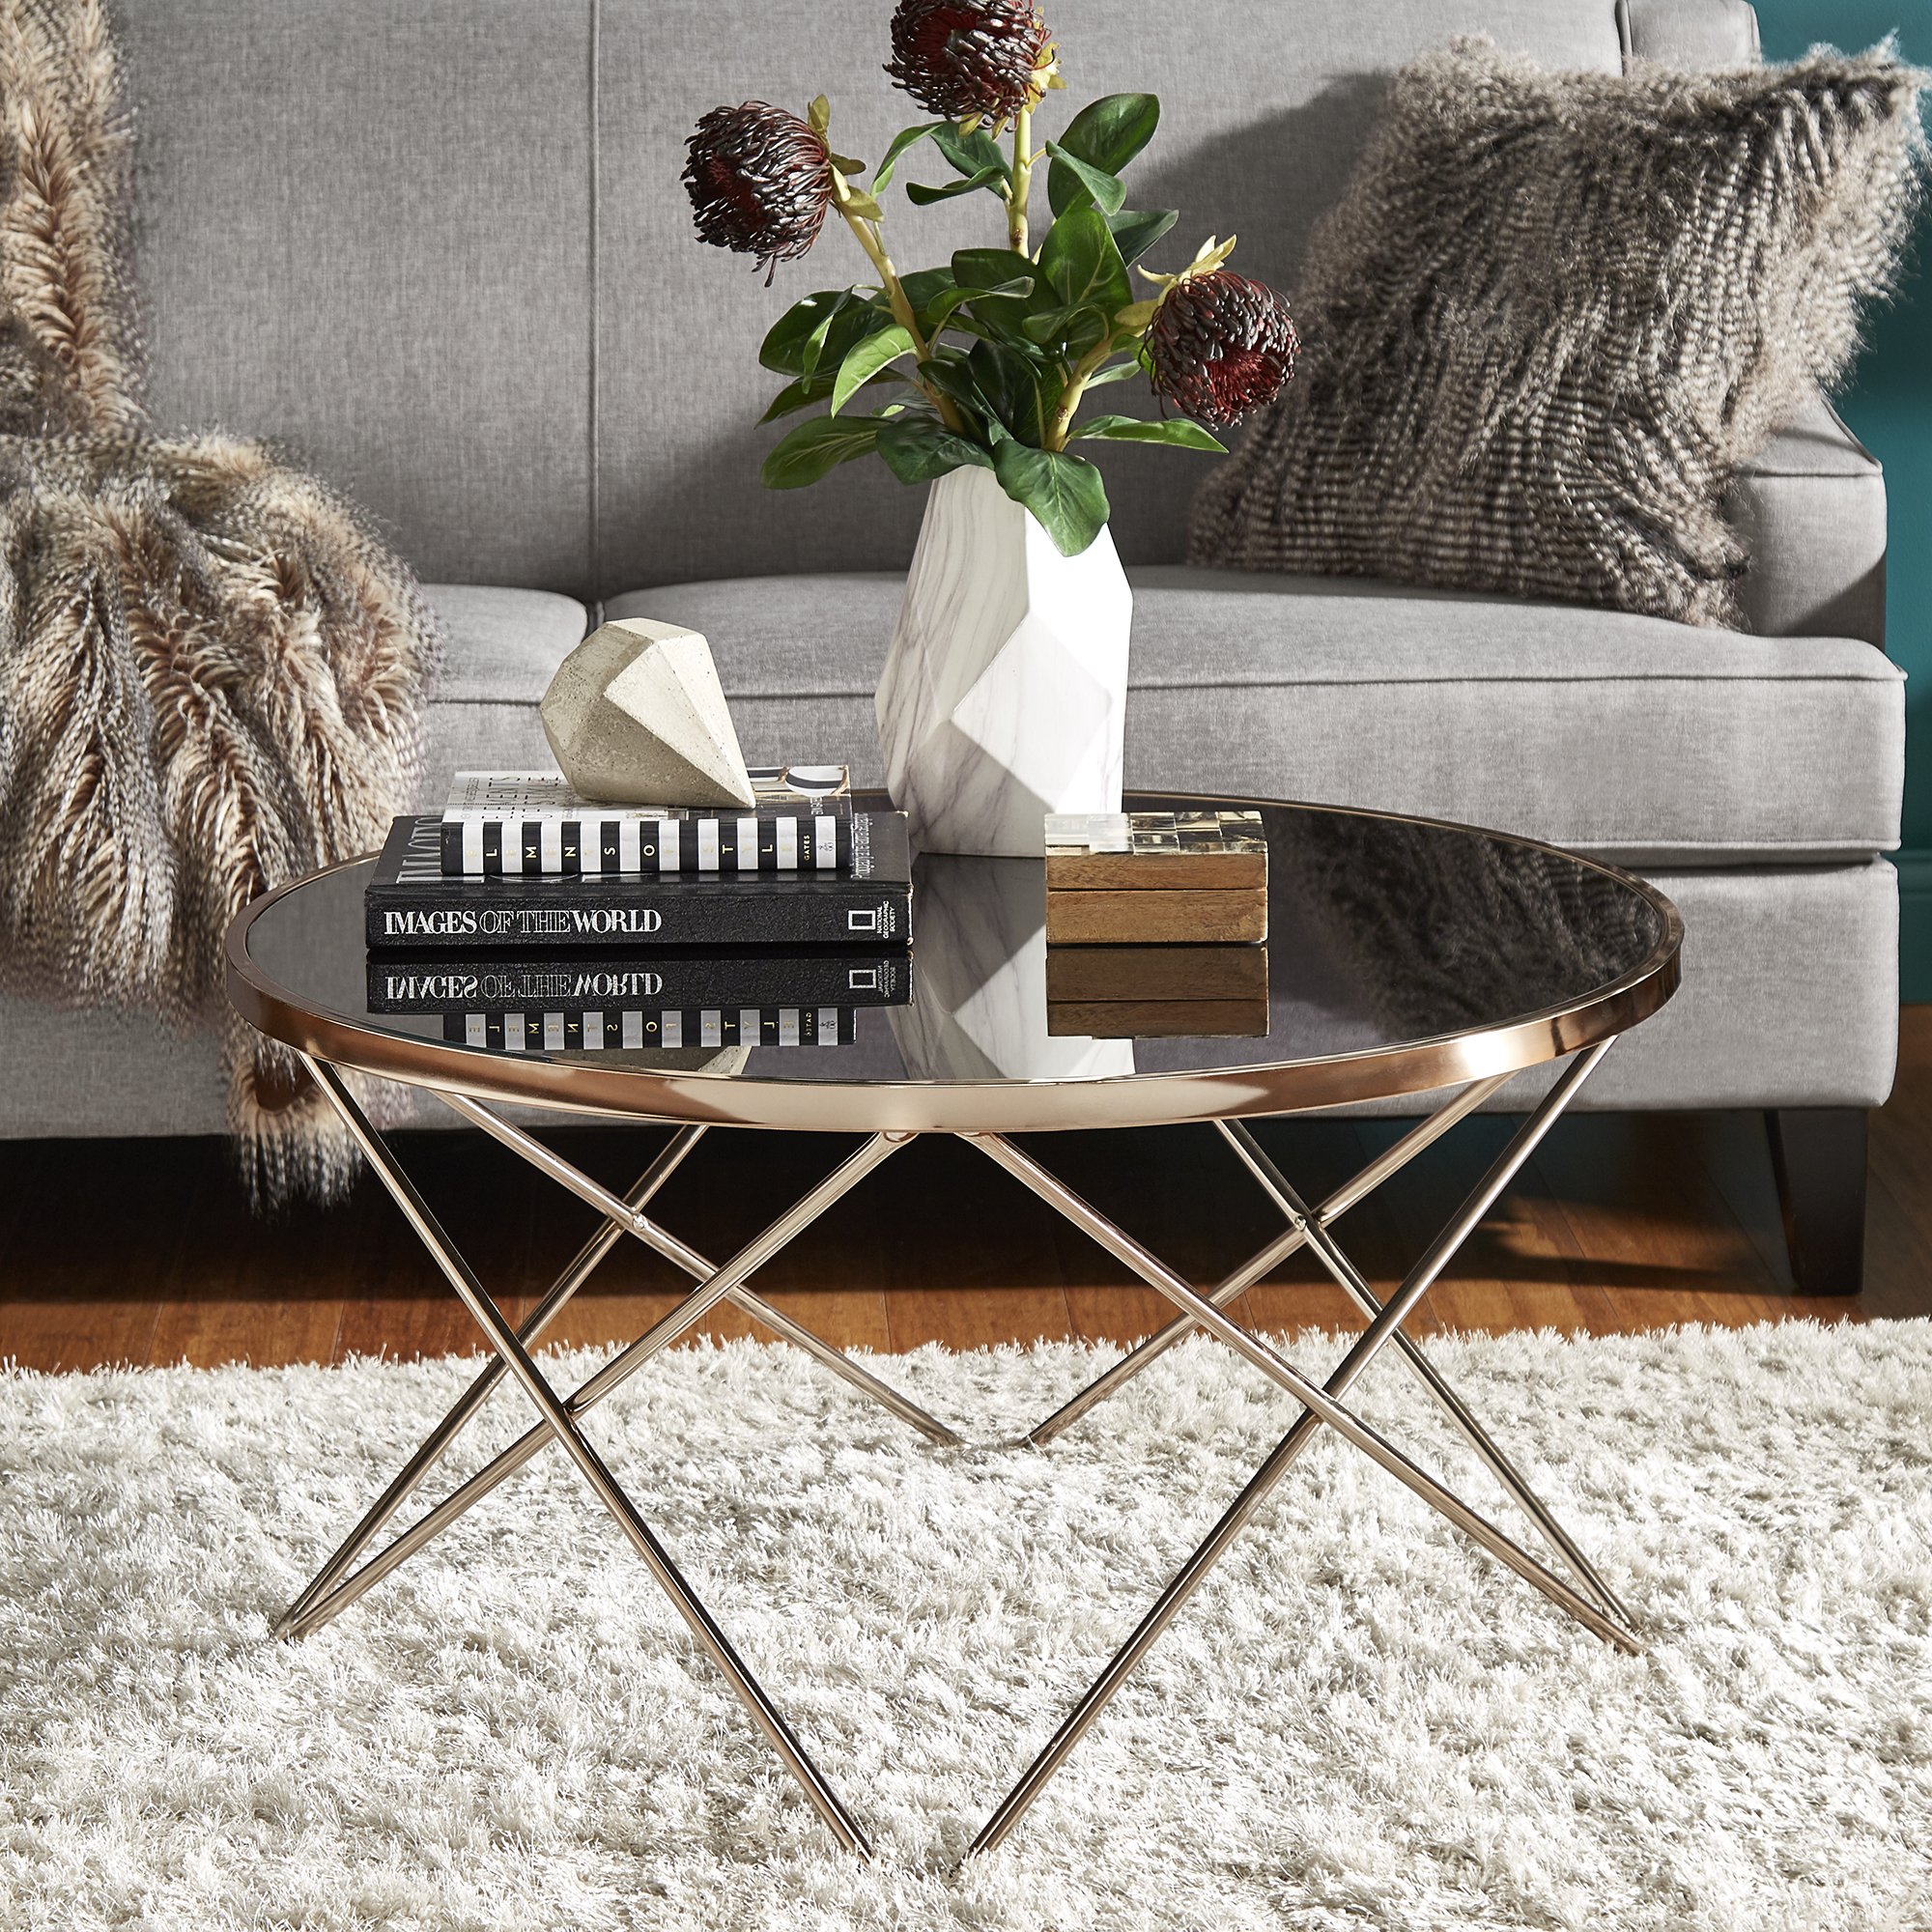 gabe champagne gold finish hairpin leg accent tables with black glass top inspire bold table free shipping today antique mirror coffee high dining chairs and mid century chair